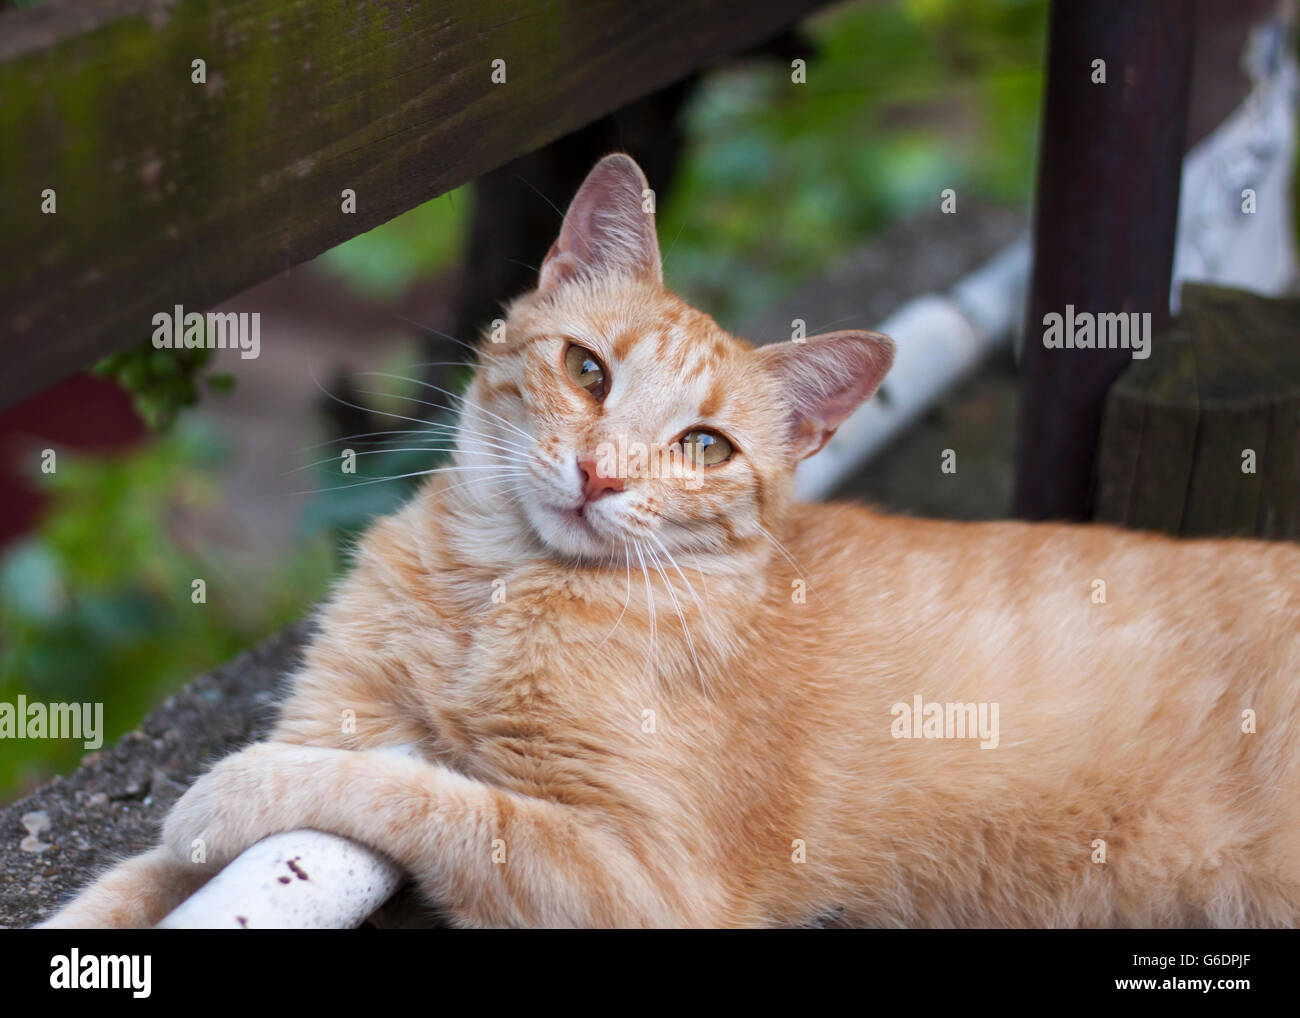 Young ginger cat with big eyes  relaxing on concrete in backyard Stock Photo